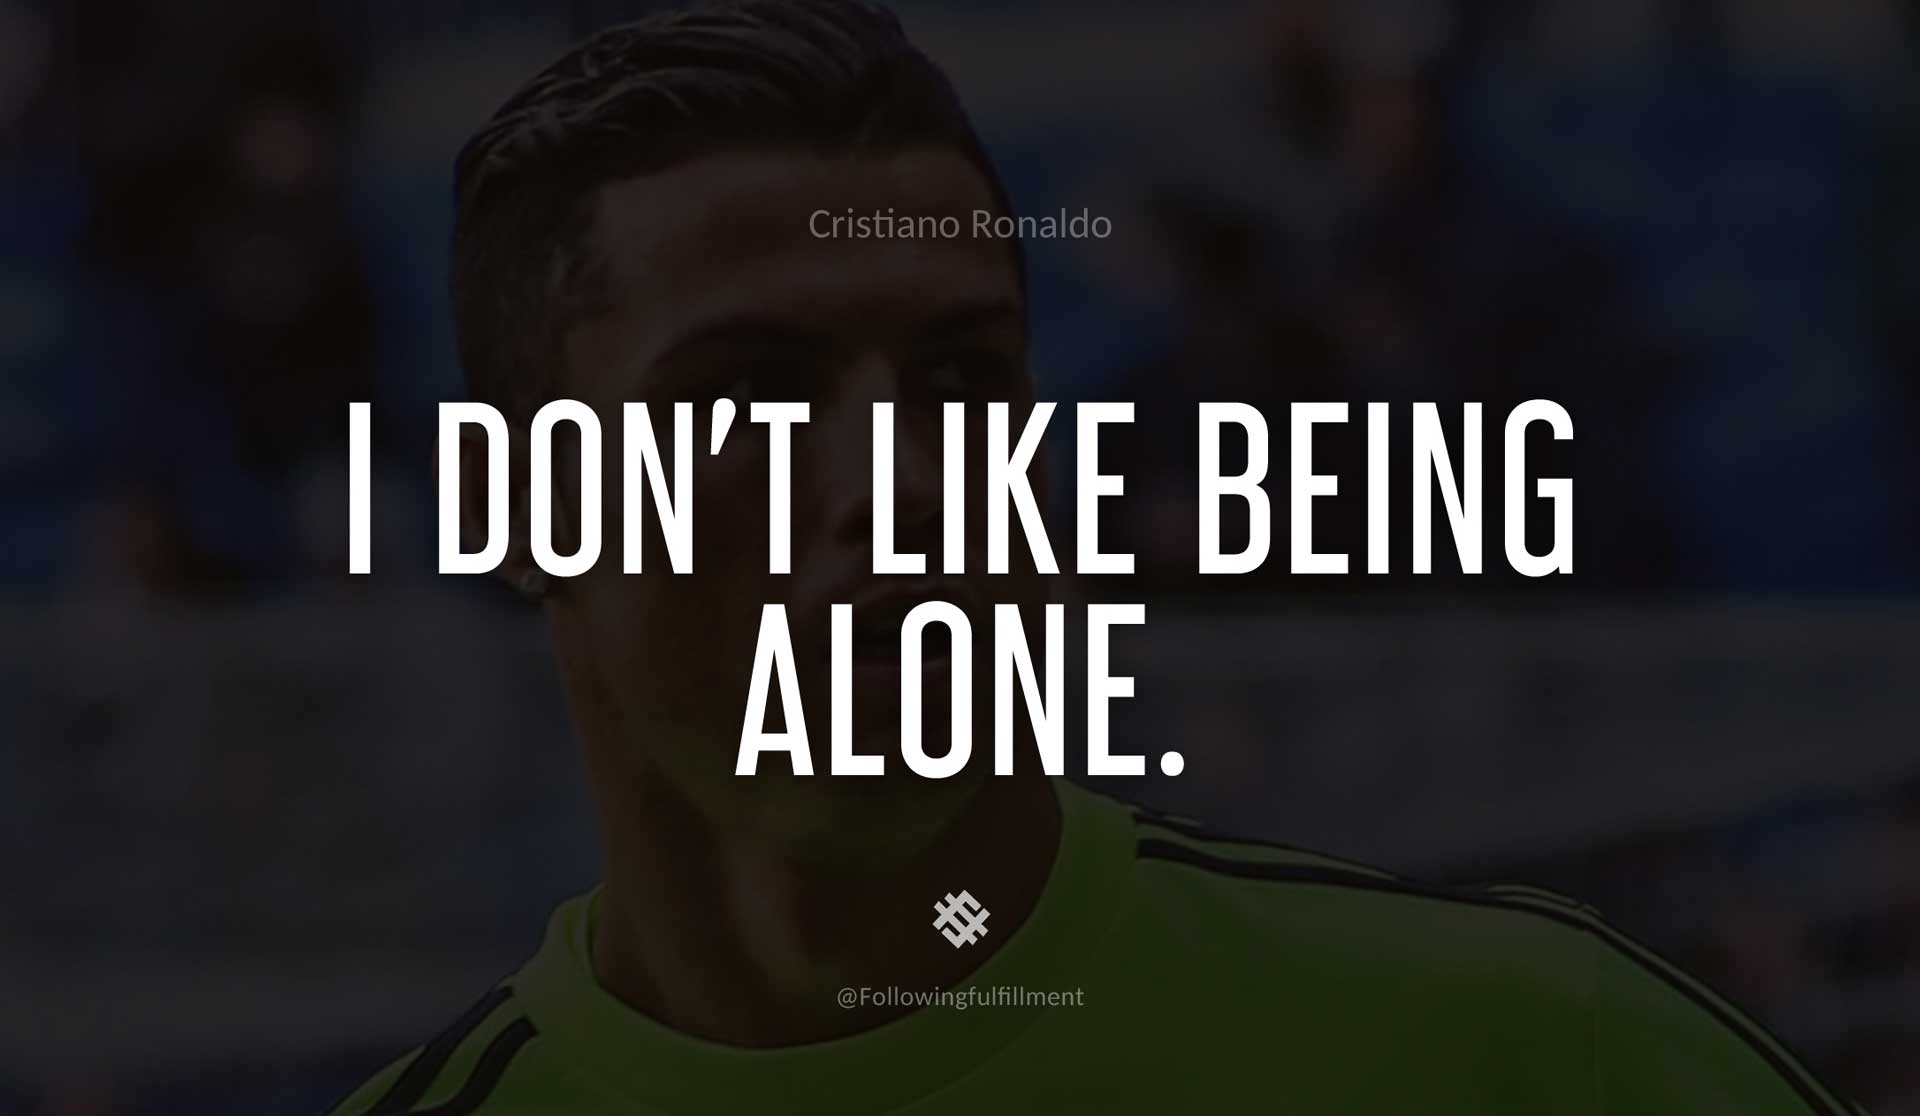 I-don't-like-being-alone.-CRISTIANO-RONALDO-Quote.jpg